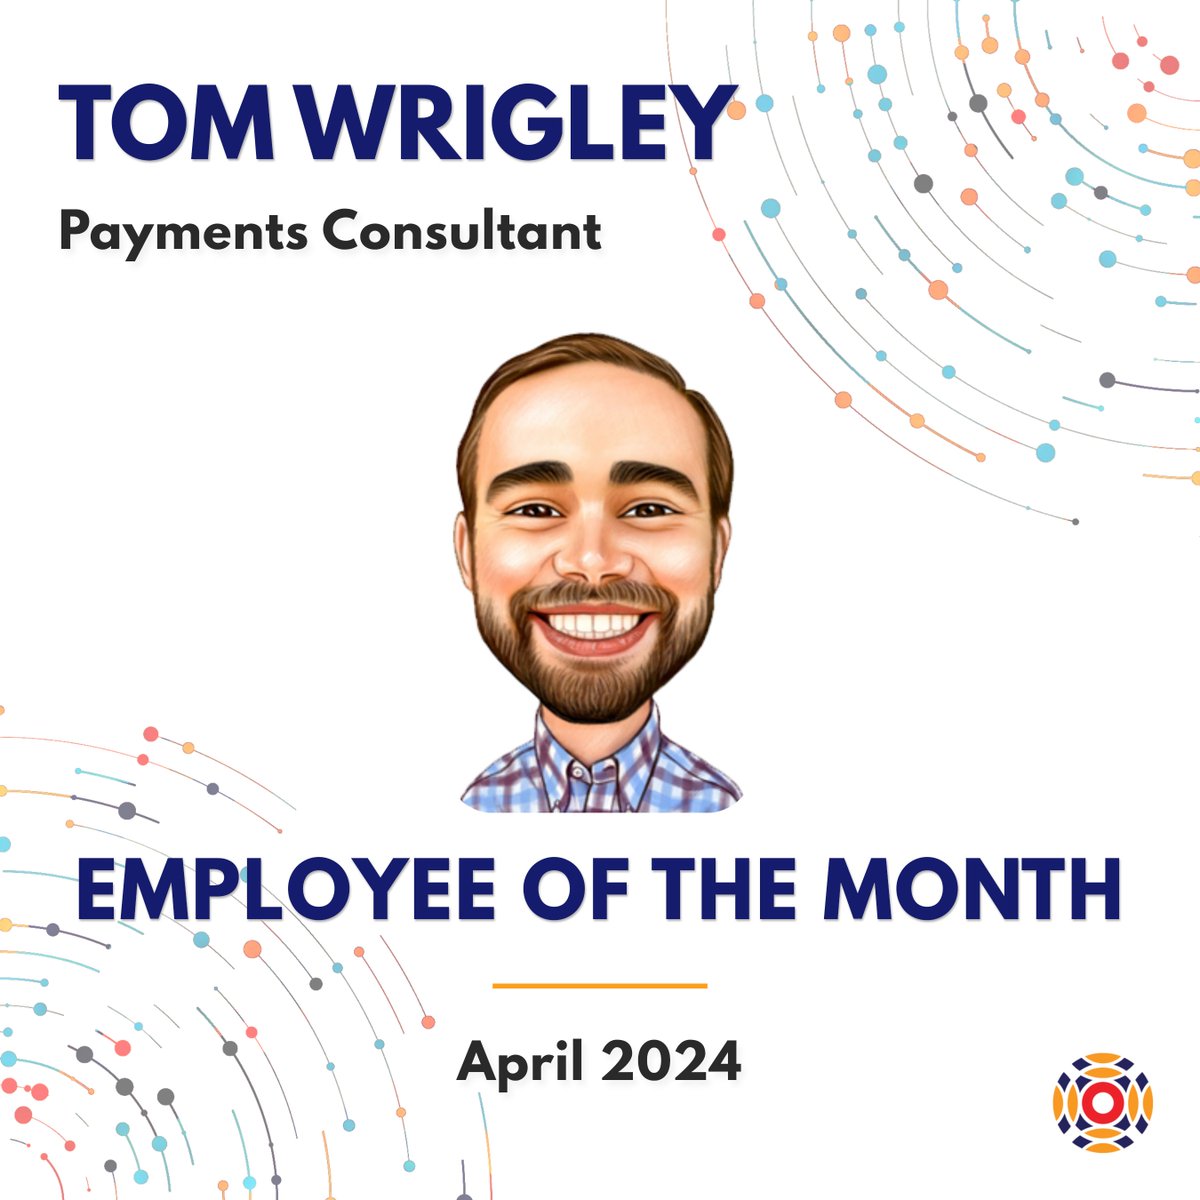 Tom Wrigley is our employee of the month for April! As a Payments Consultant, Tom goes above and beyond, using his knowledge and skills to deliver on our mission of empowering merchants in payments. Thank you, Tom! #optimizedpayments #employeeofthemonth #success